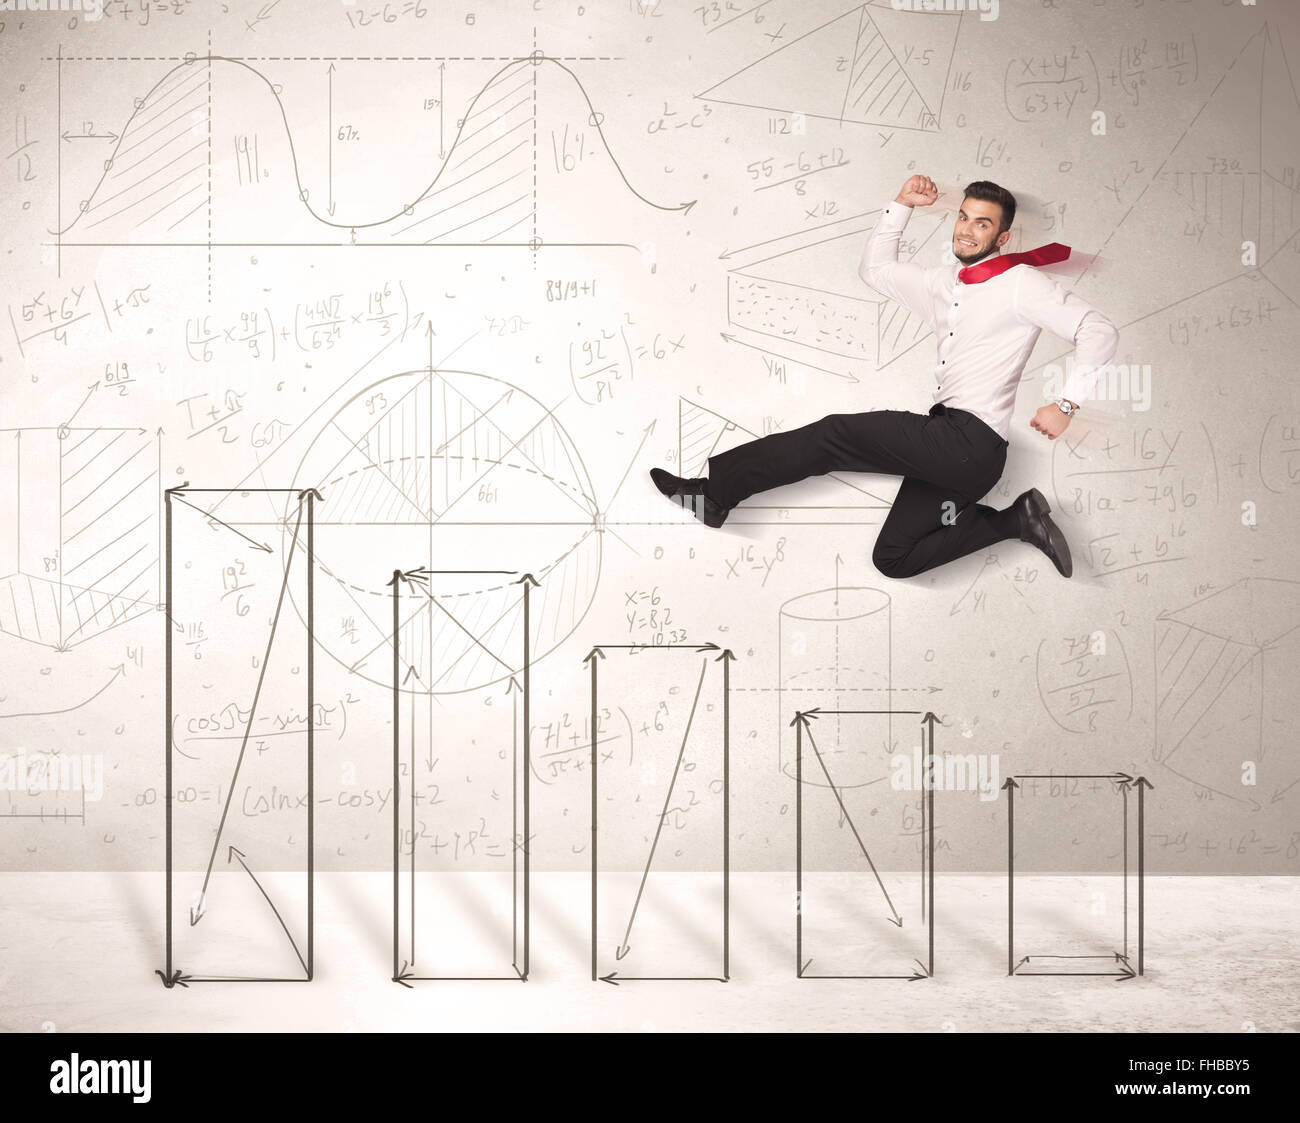 Fast business man jumping up on hand drawn charts Stock Photo